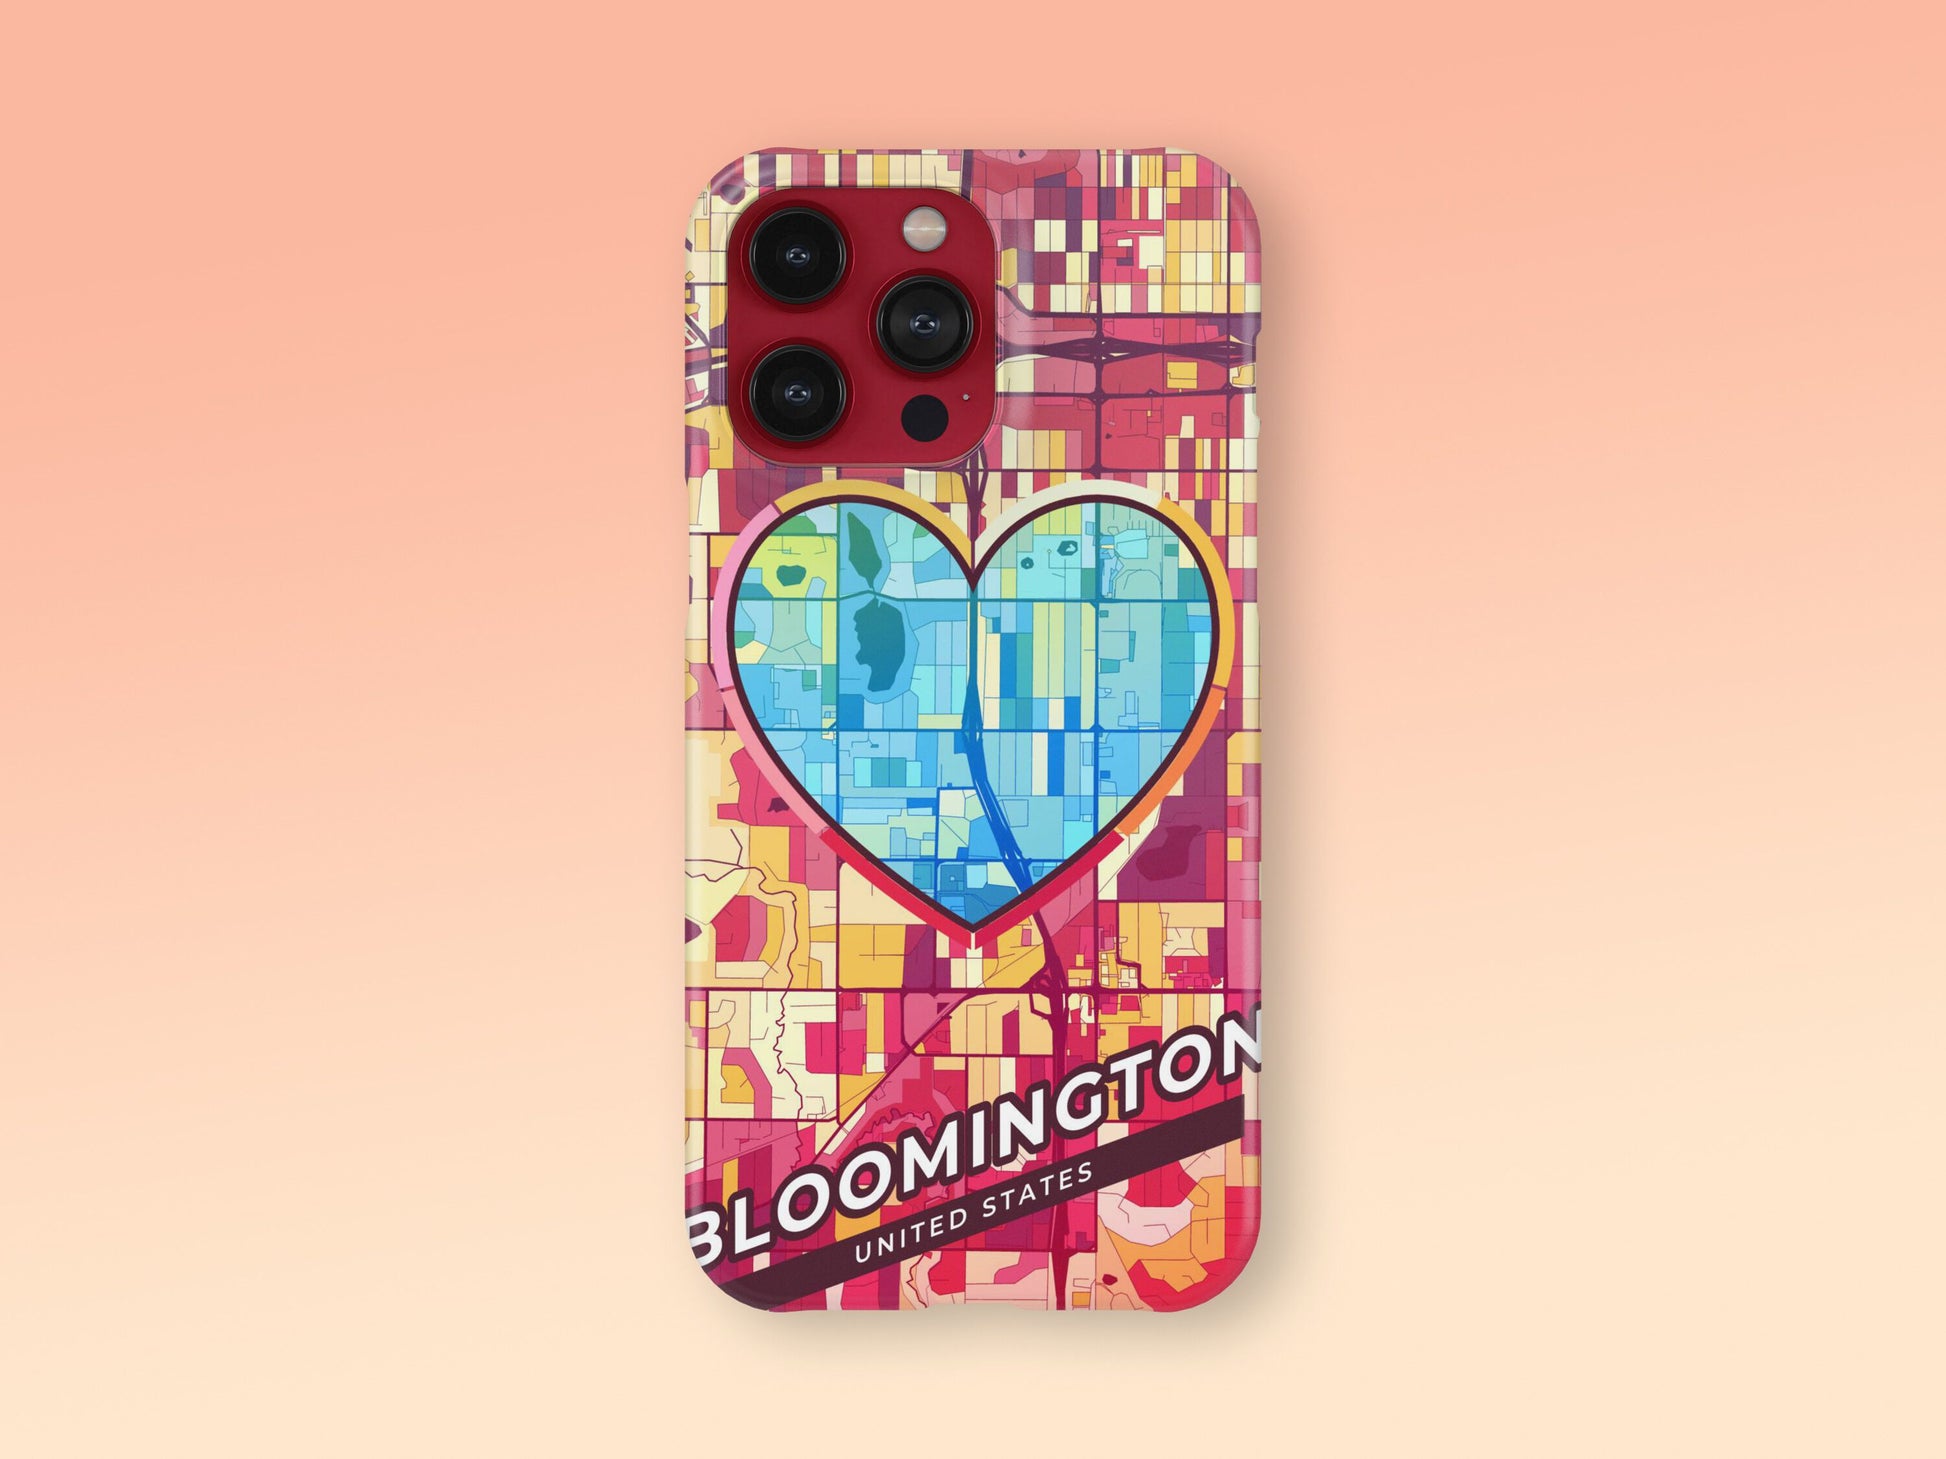 Bloomington Minnesota slim phone case with colorful icon. Birthday, wedding or housewarming gift. Couple match cases. 2